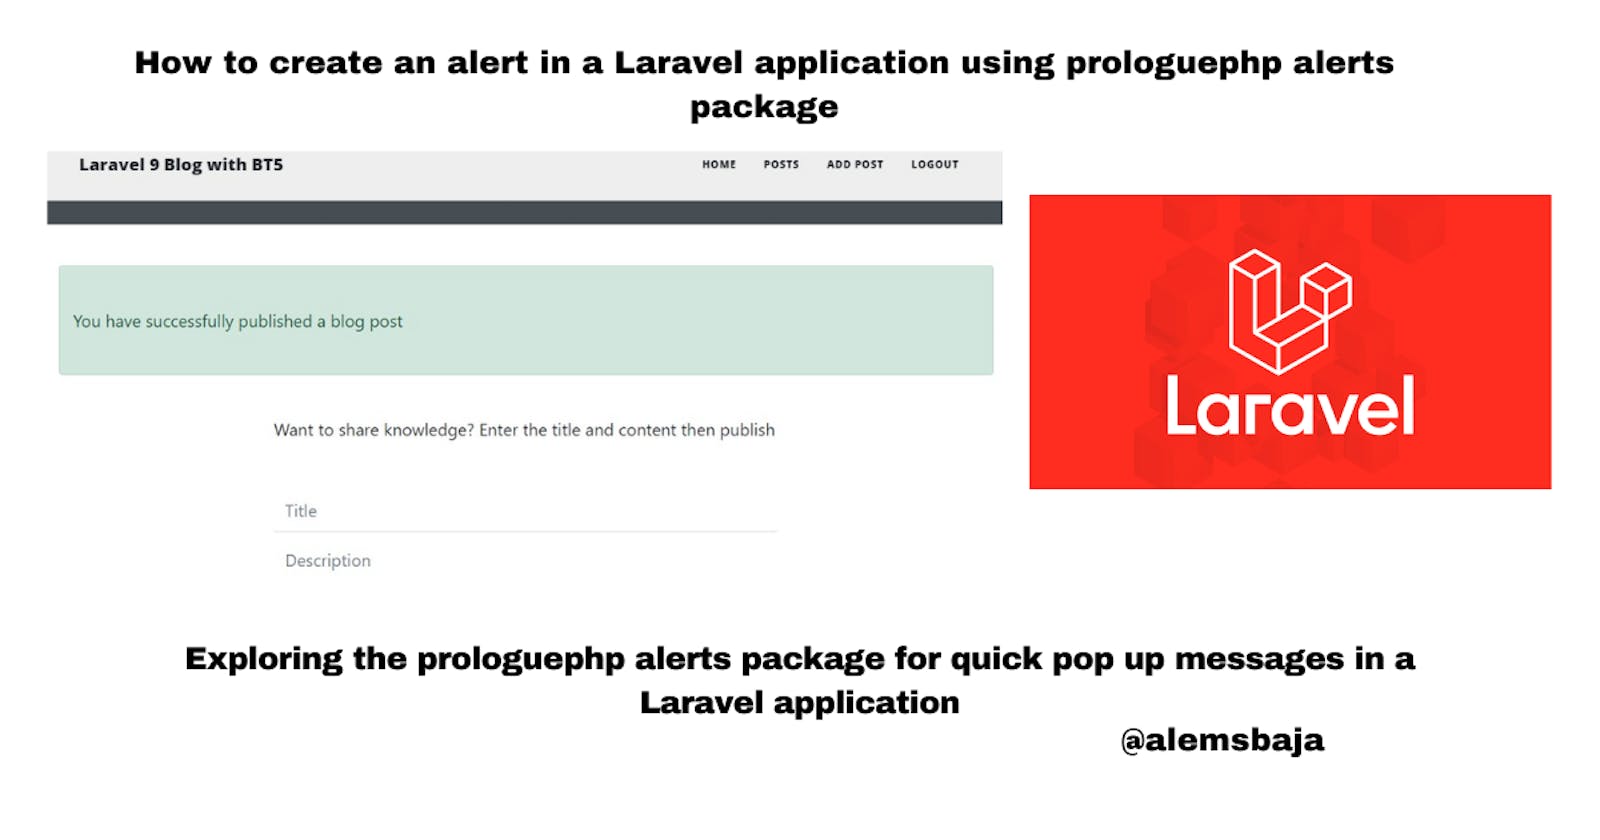 How to create an alert in a Laravel application using prologuephp alerts package